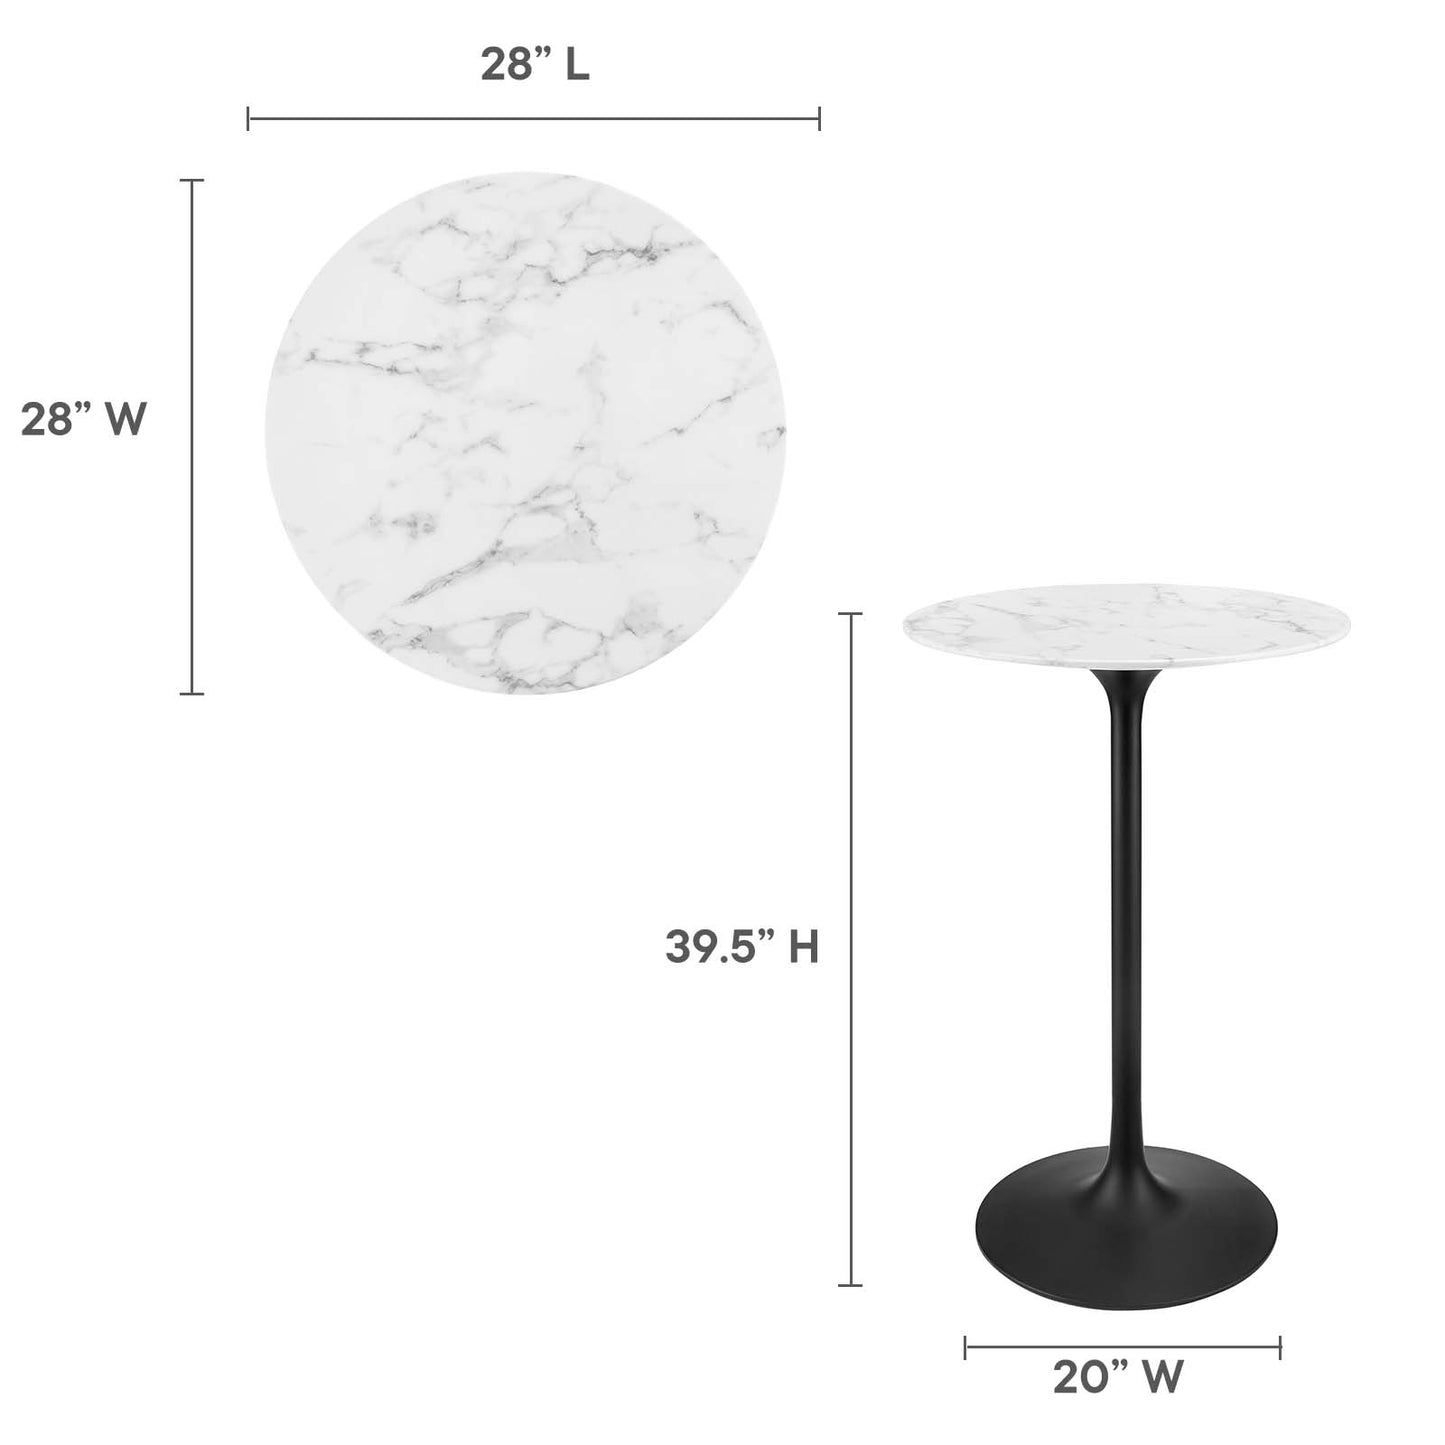 Modway Lippa 28" Round Artificial Marble Bar Table - EEI-3547